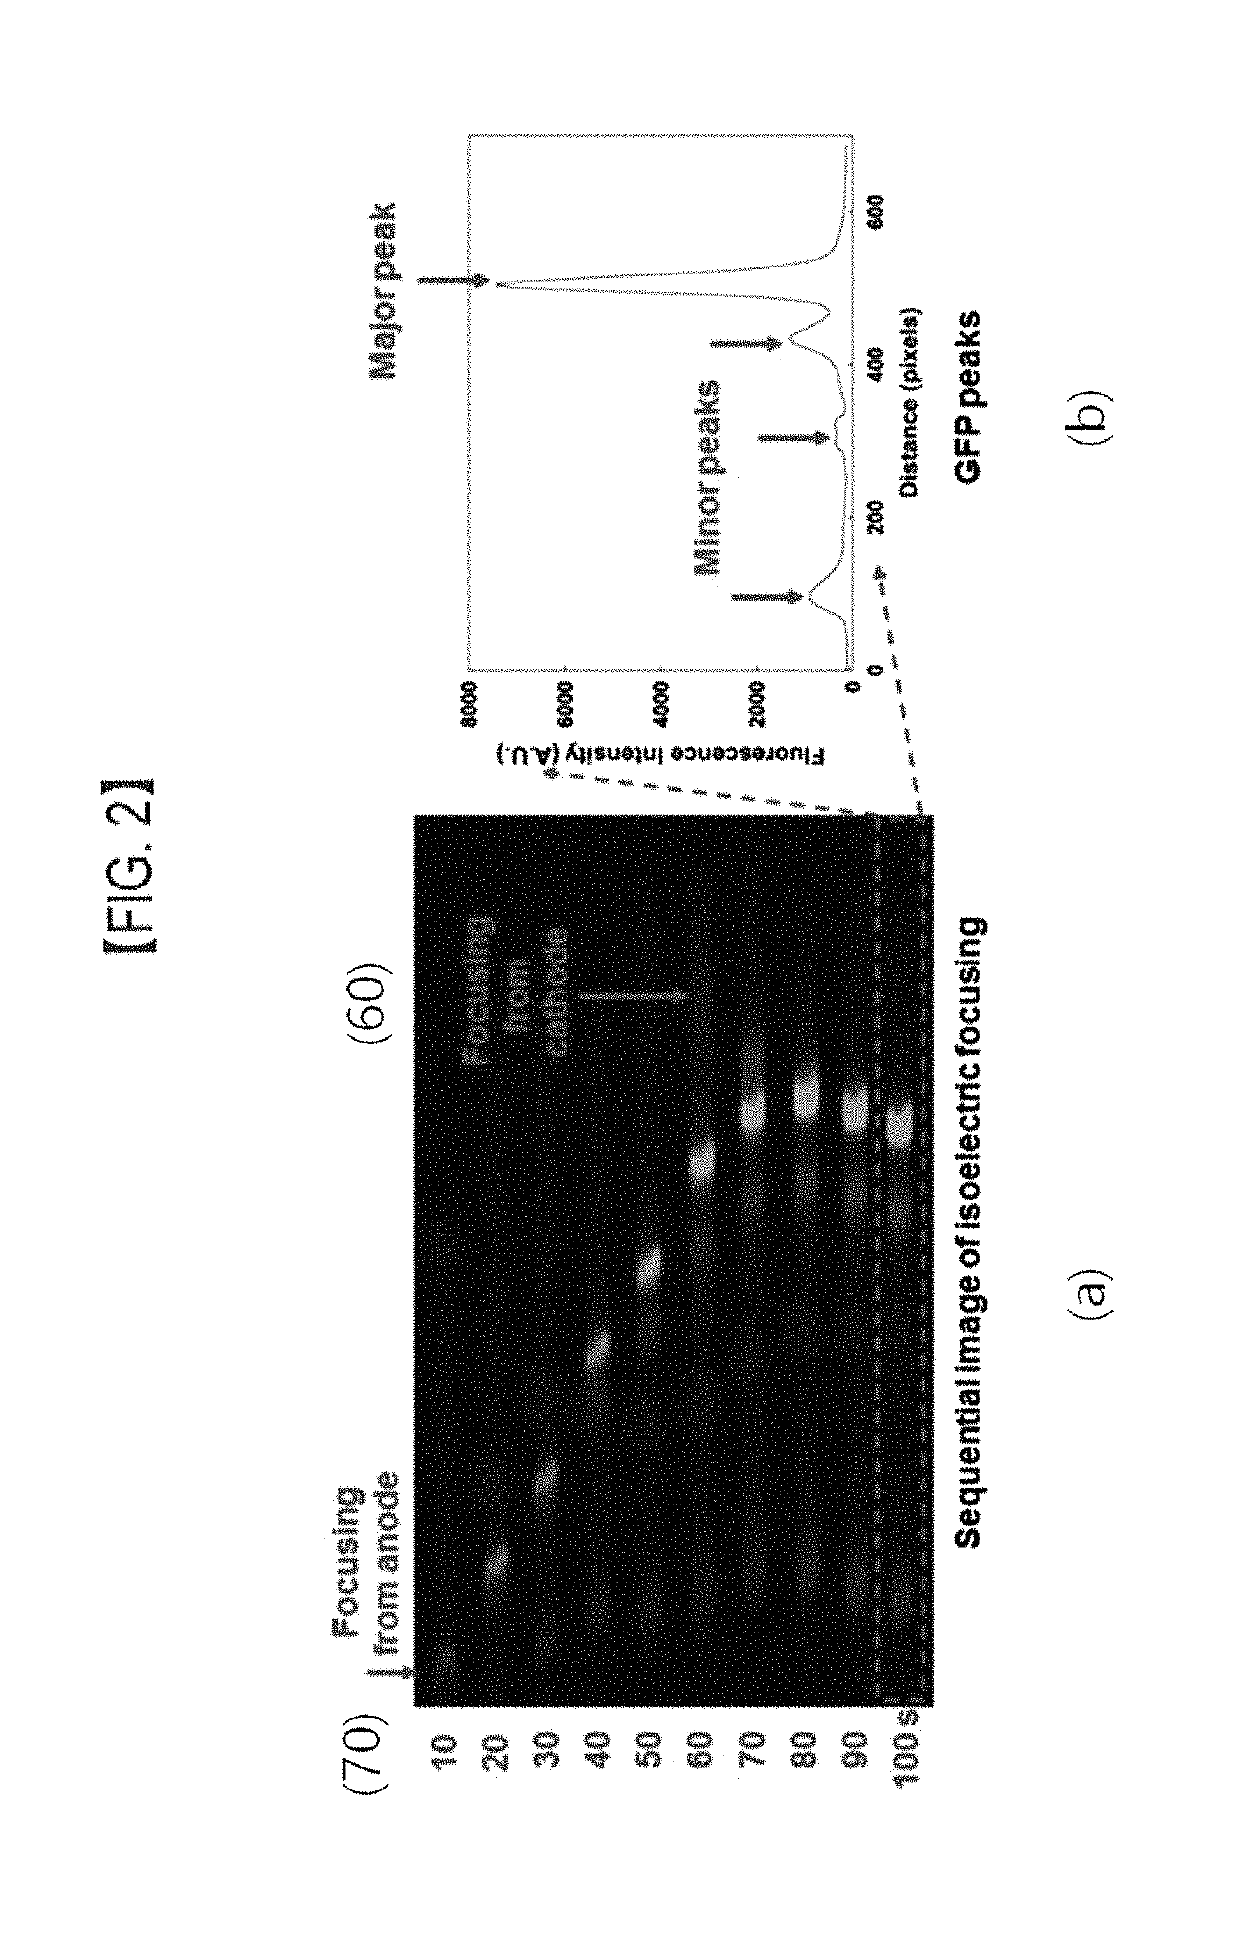 Nonvolatile protein memory system with optical write/erase and electrical readout capability